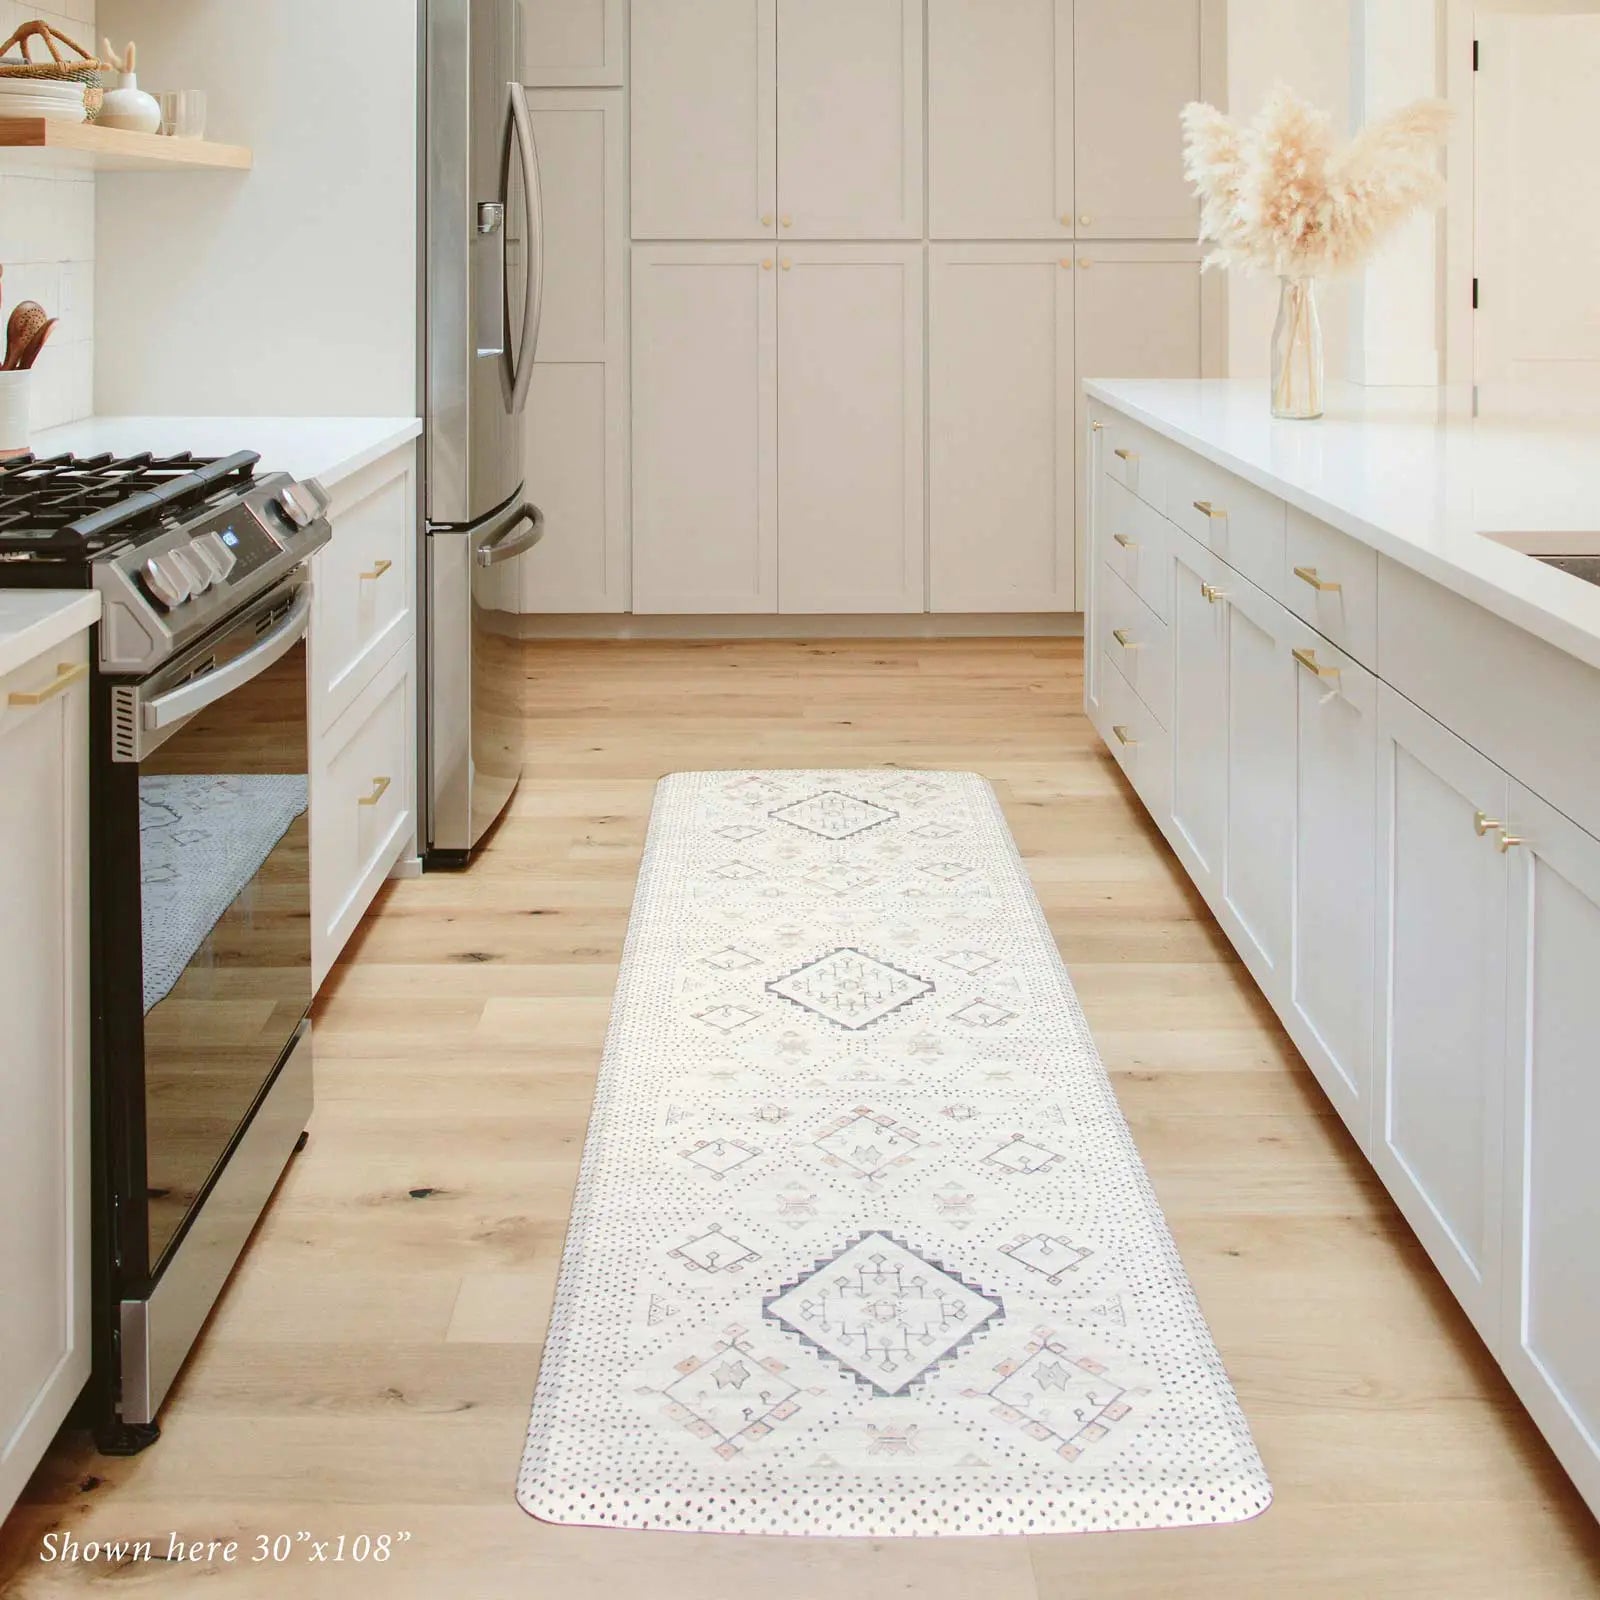 Neutral boho kitchen mat in between two kitchen counters in size 30x108